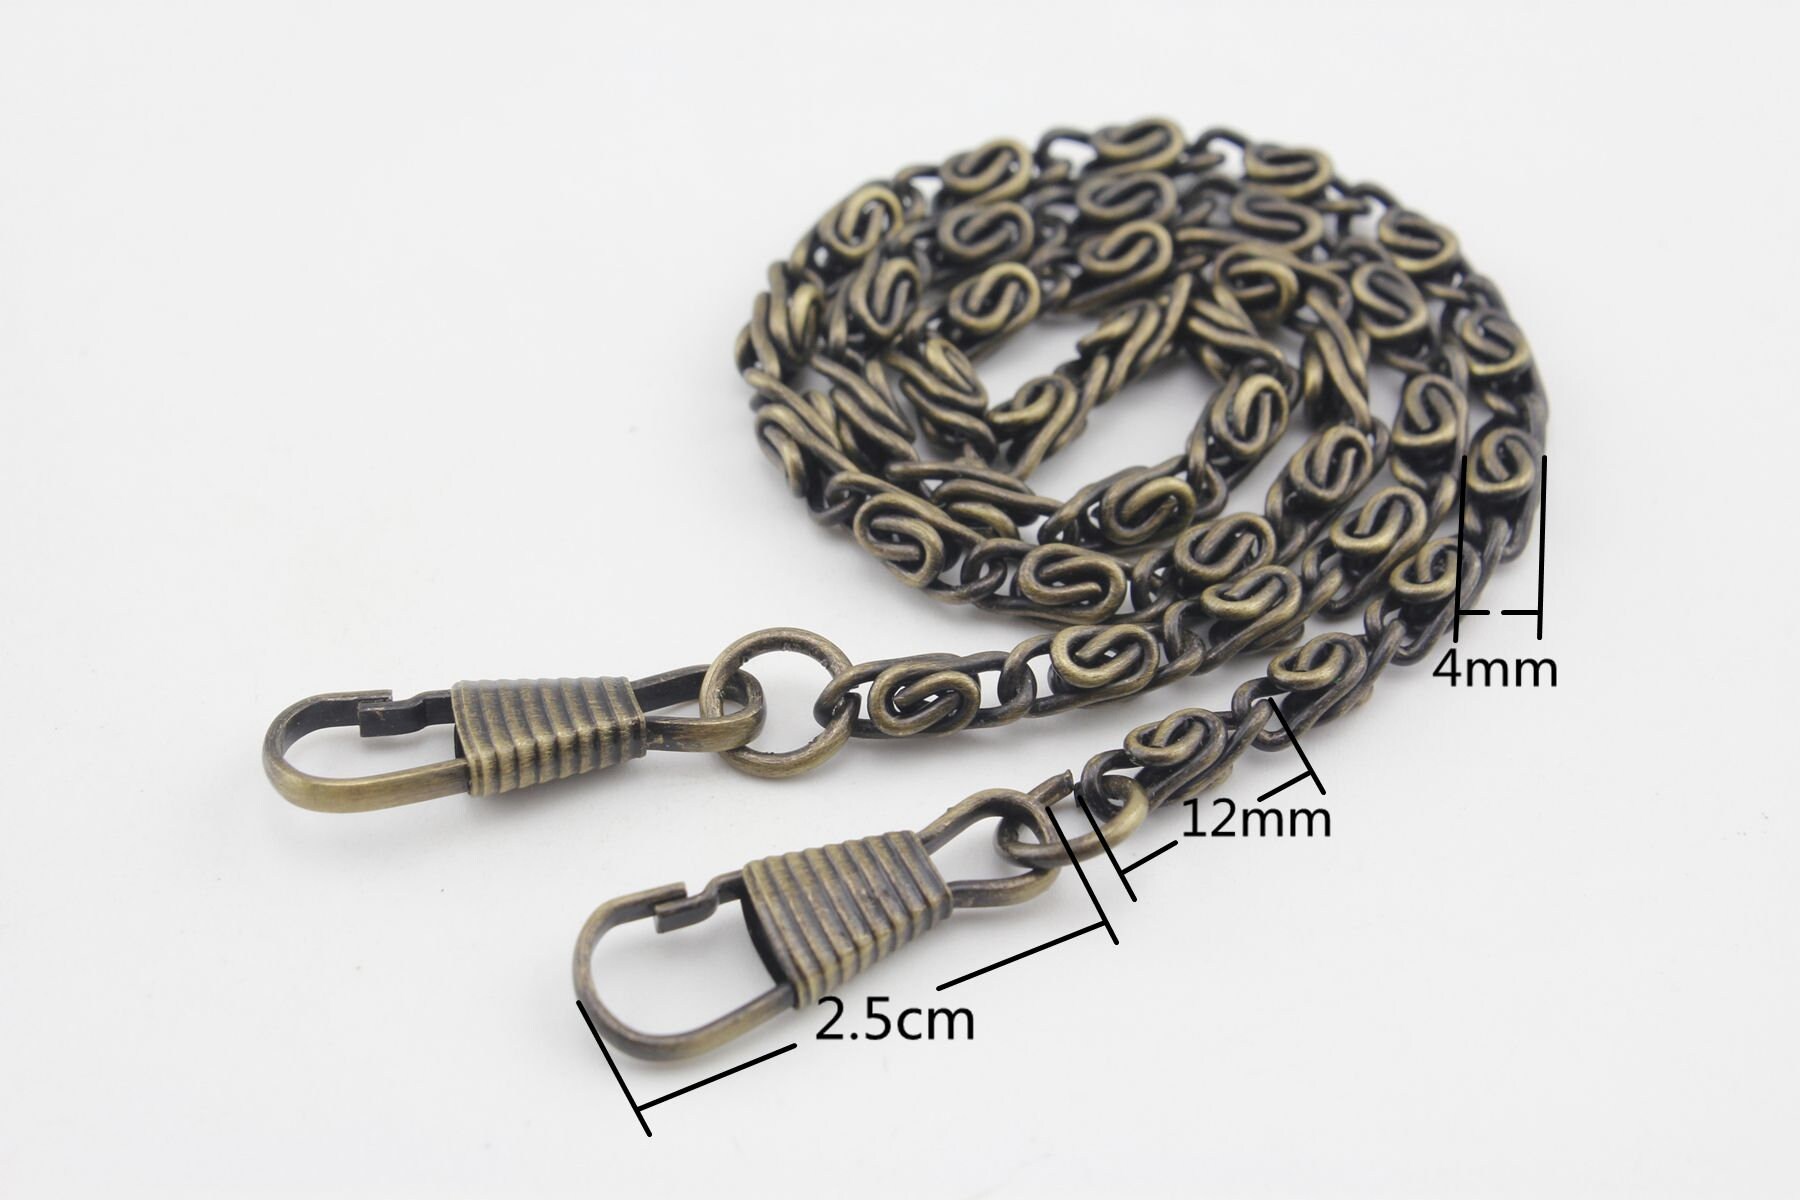 40cm Short Purse Chain for Bag Wallet Purse Handbags Clutch Chain Strap  With Clip Replacement Hardware Nickel Gunmetal Anti Brass Gold -  Israel